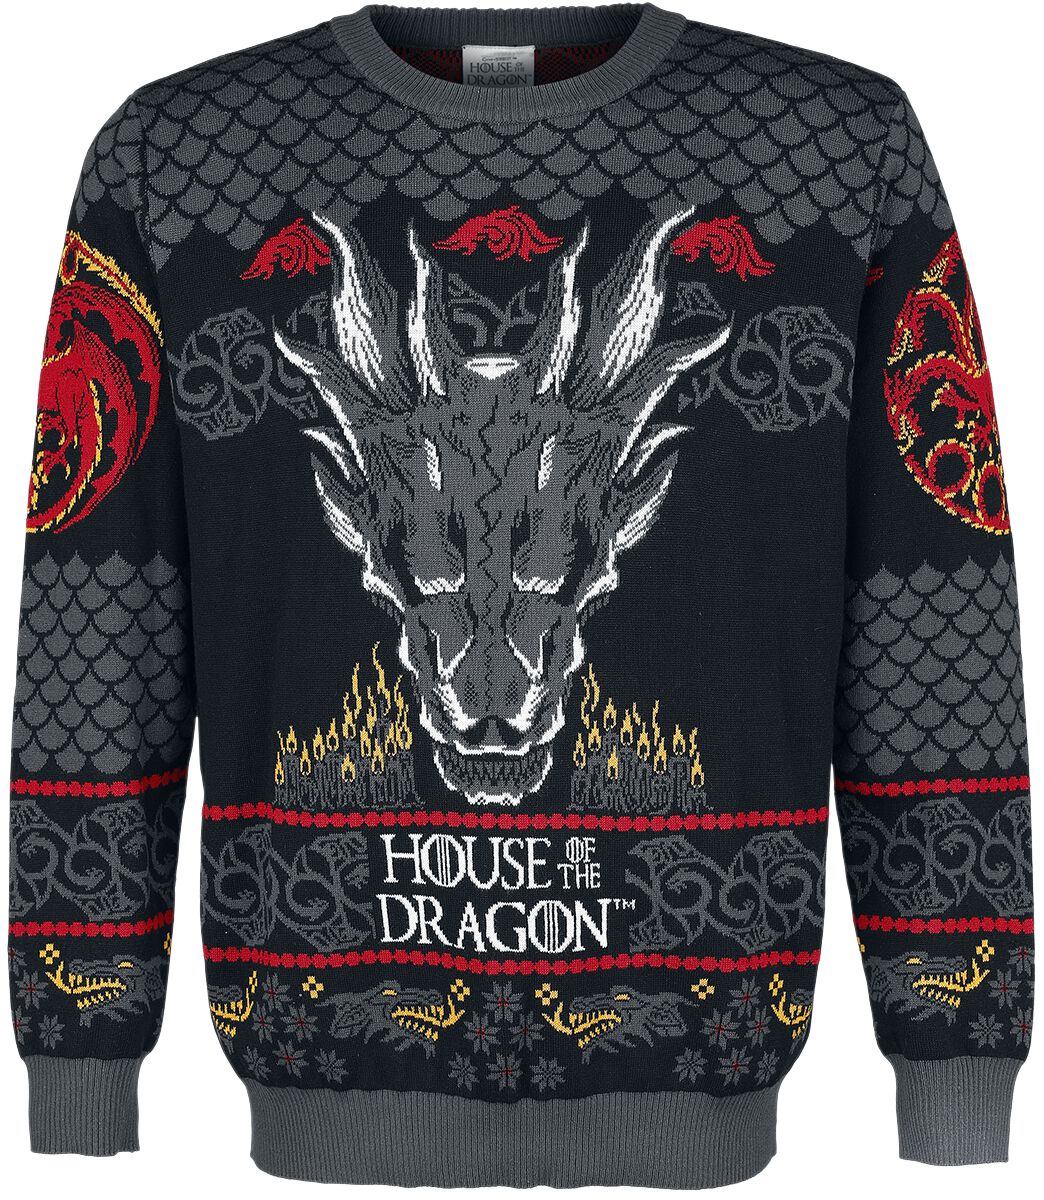 Game of Thrones House of the Dragon - Dragon Christmas jumper multicolour